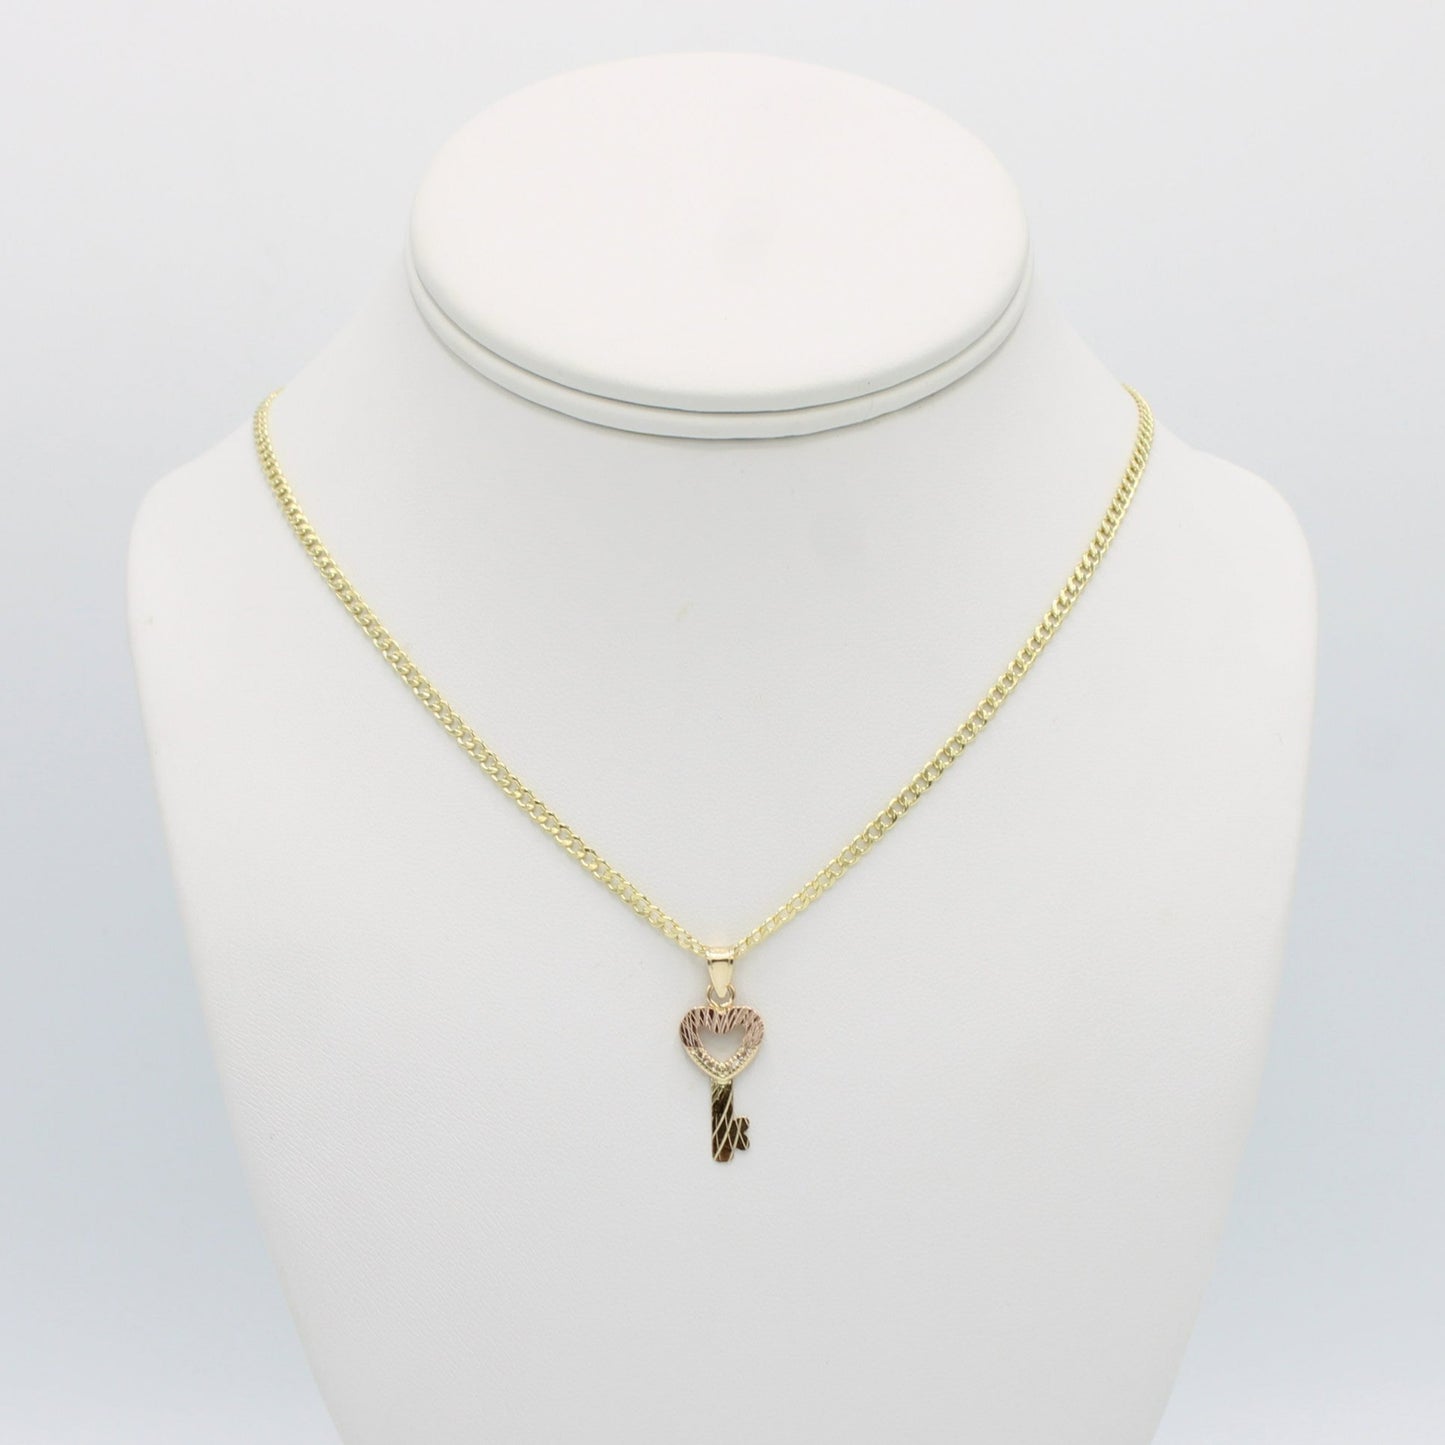 14K Key Pendant Two Tones with Cuban Chain Yellow Gold